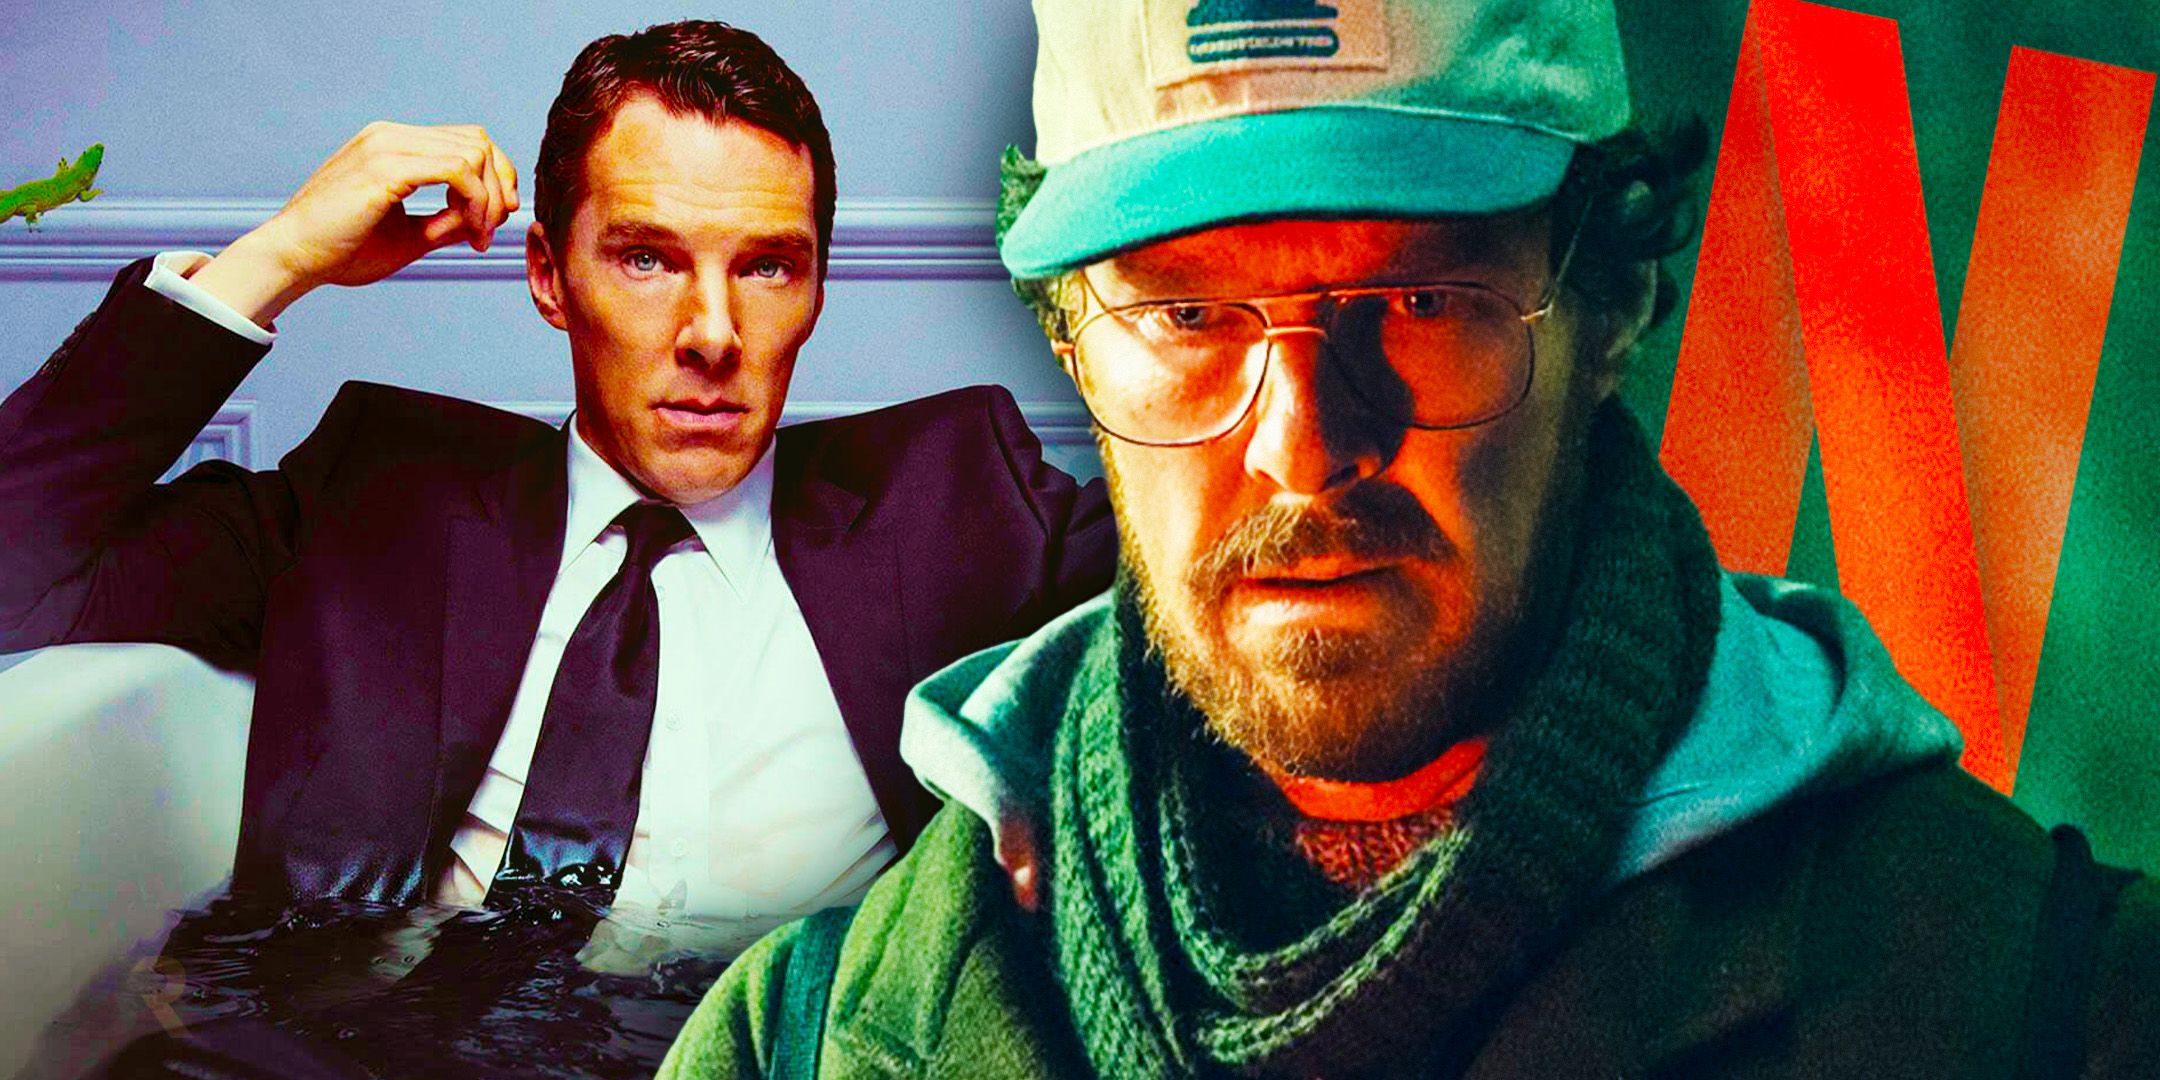 Benedict Cumberbatch 2 Upcoming Netflix Releases Have Something Odd In Common